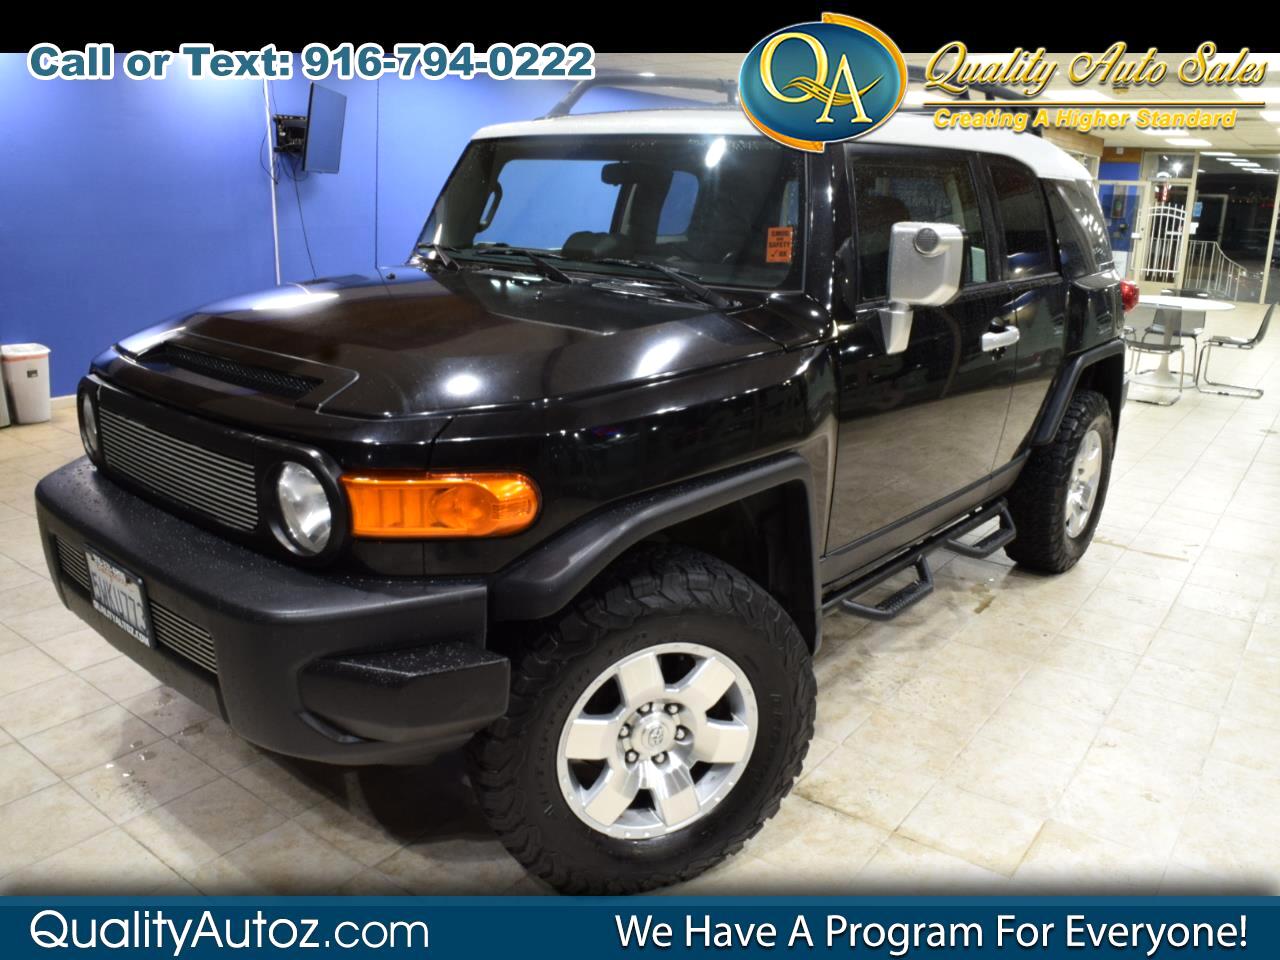 Used 2007 Toyota Fj Cruiser 4wd 4dr Auto Natl For Sale In